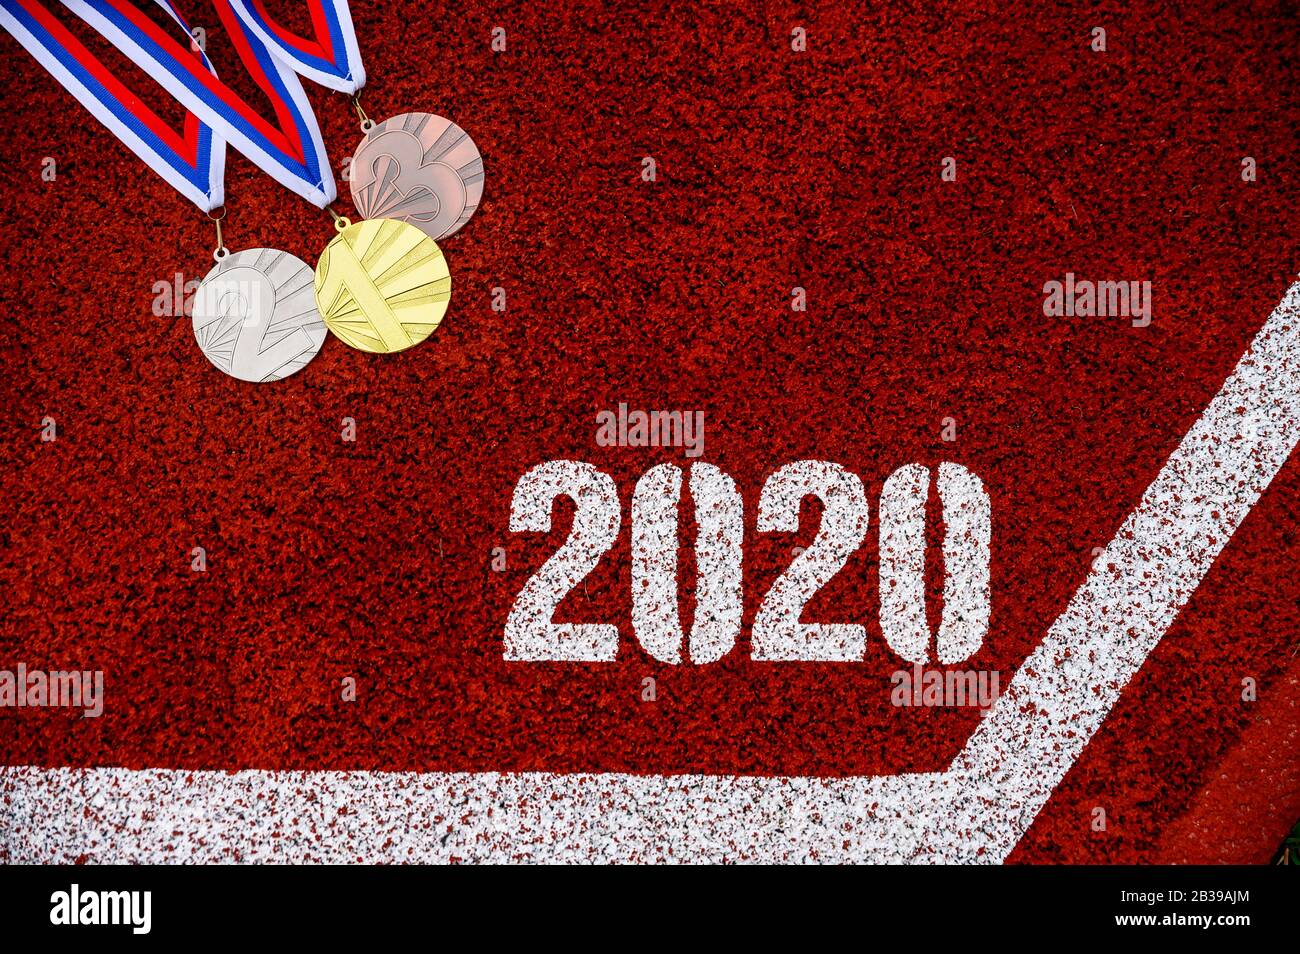 Medal set and Tittle 2020 on red sport running, athletics track Stock Photo